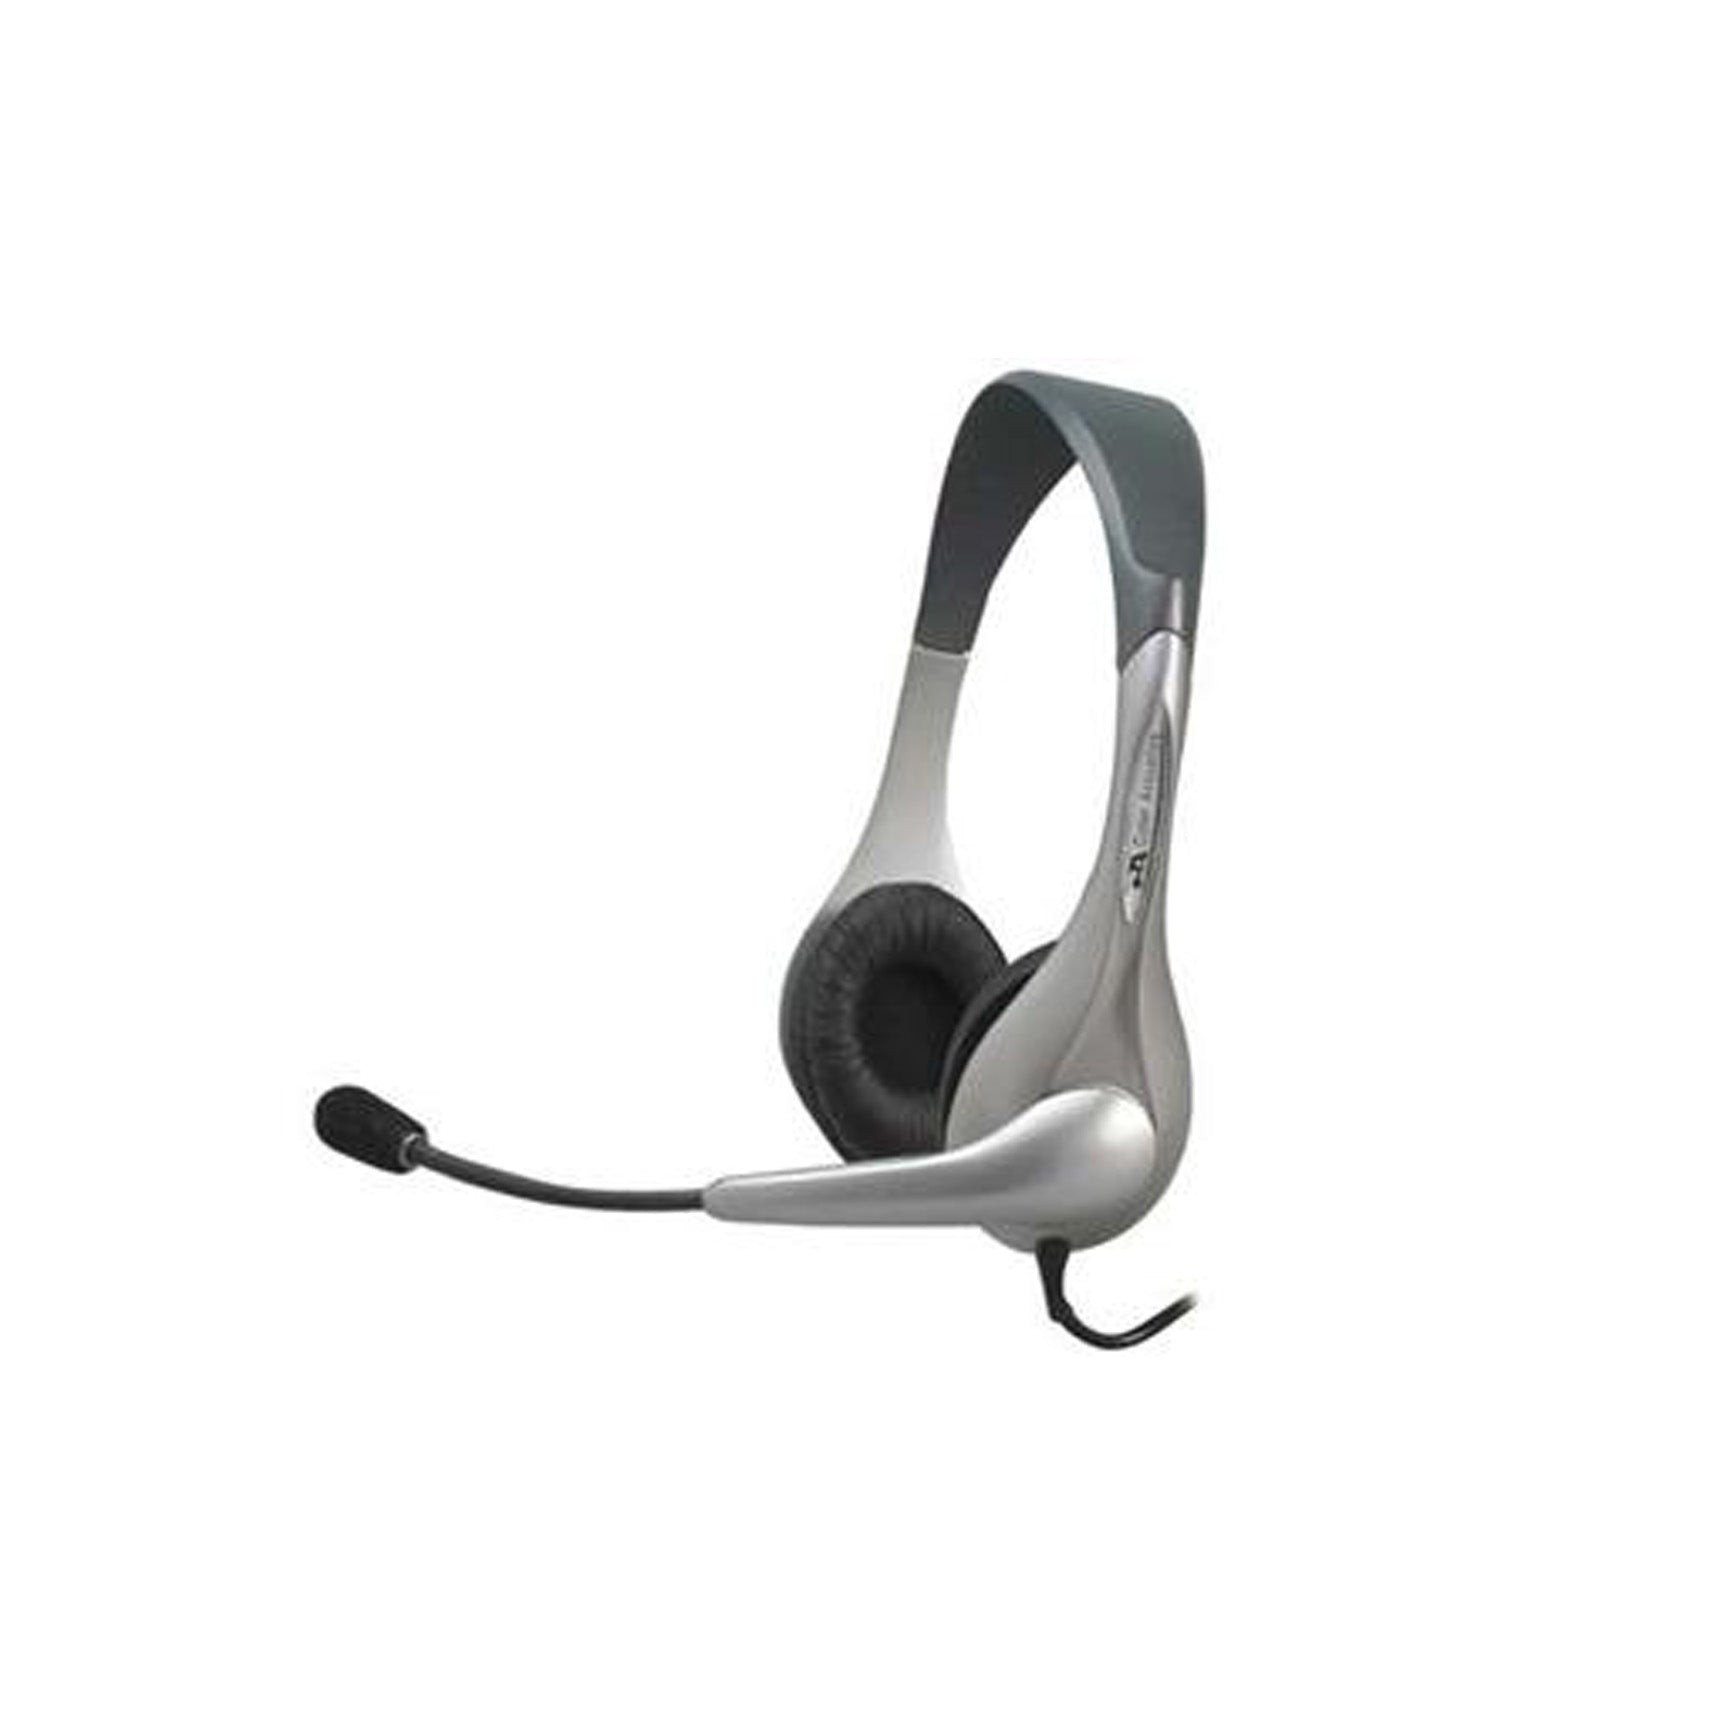 Cyber Acoustics Speech Recognition Stereo Headset and Boom Mic